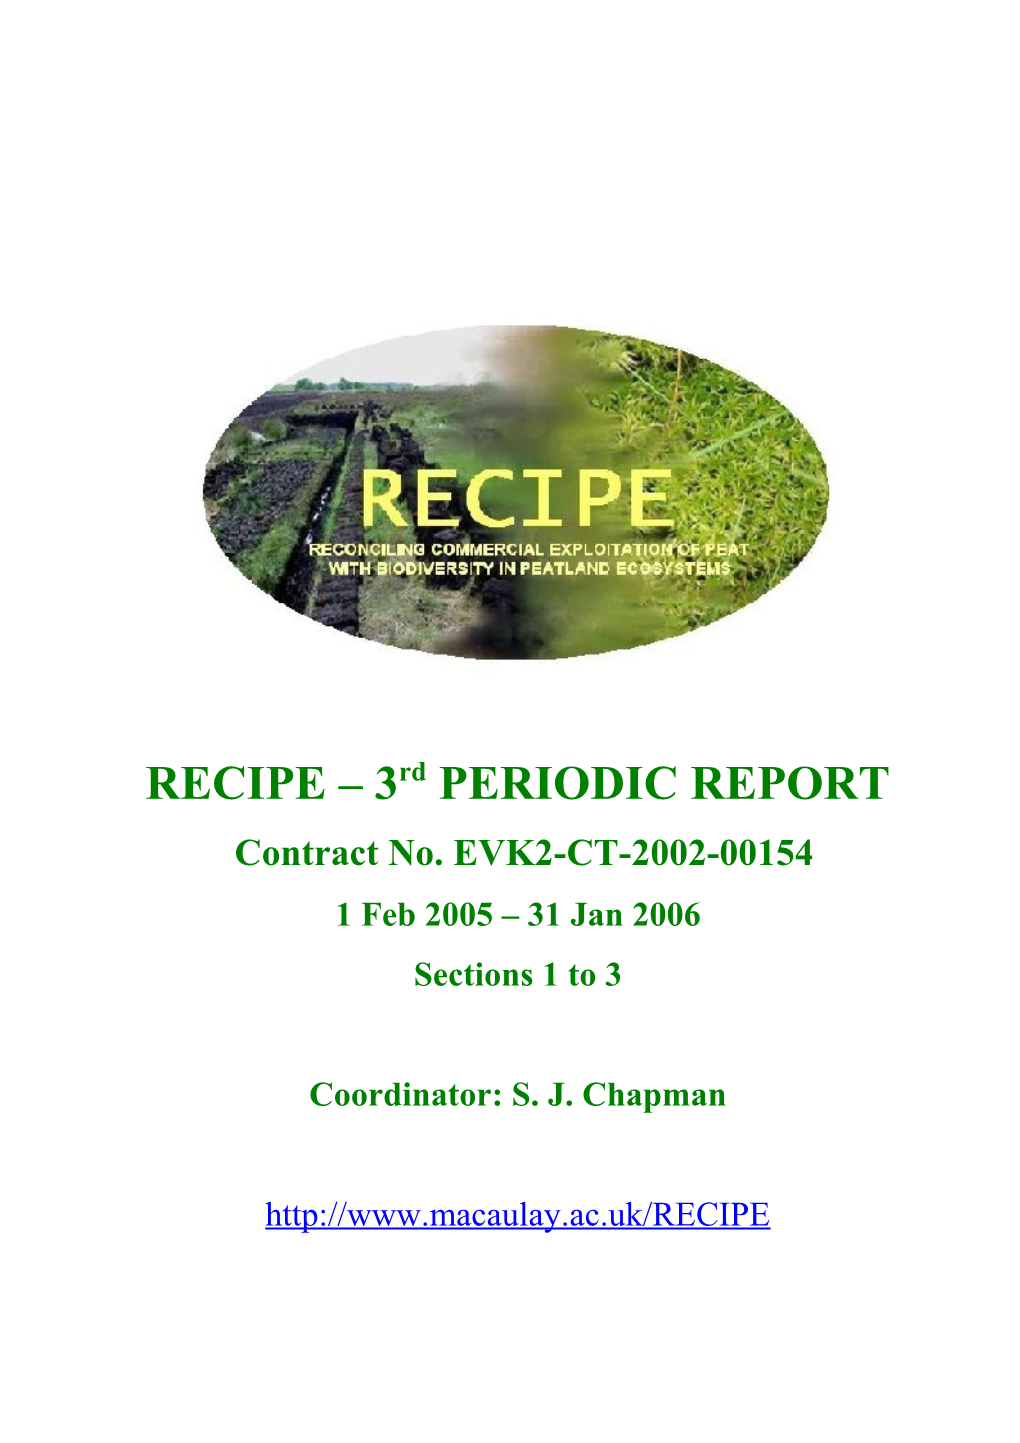 SECTION 1: Management and Resource Usage Summary, Related to the Reporting Period (6 Months